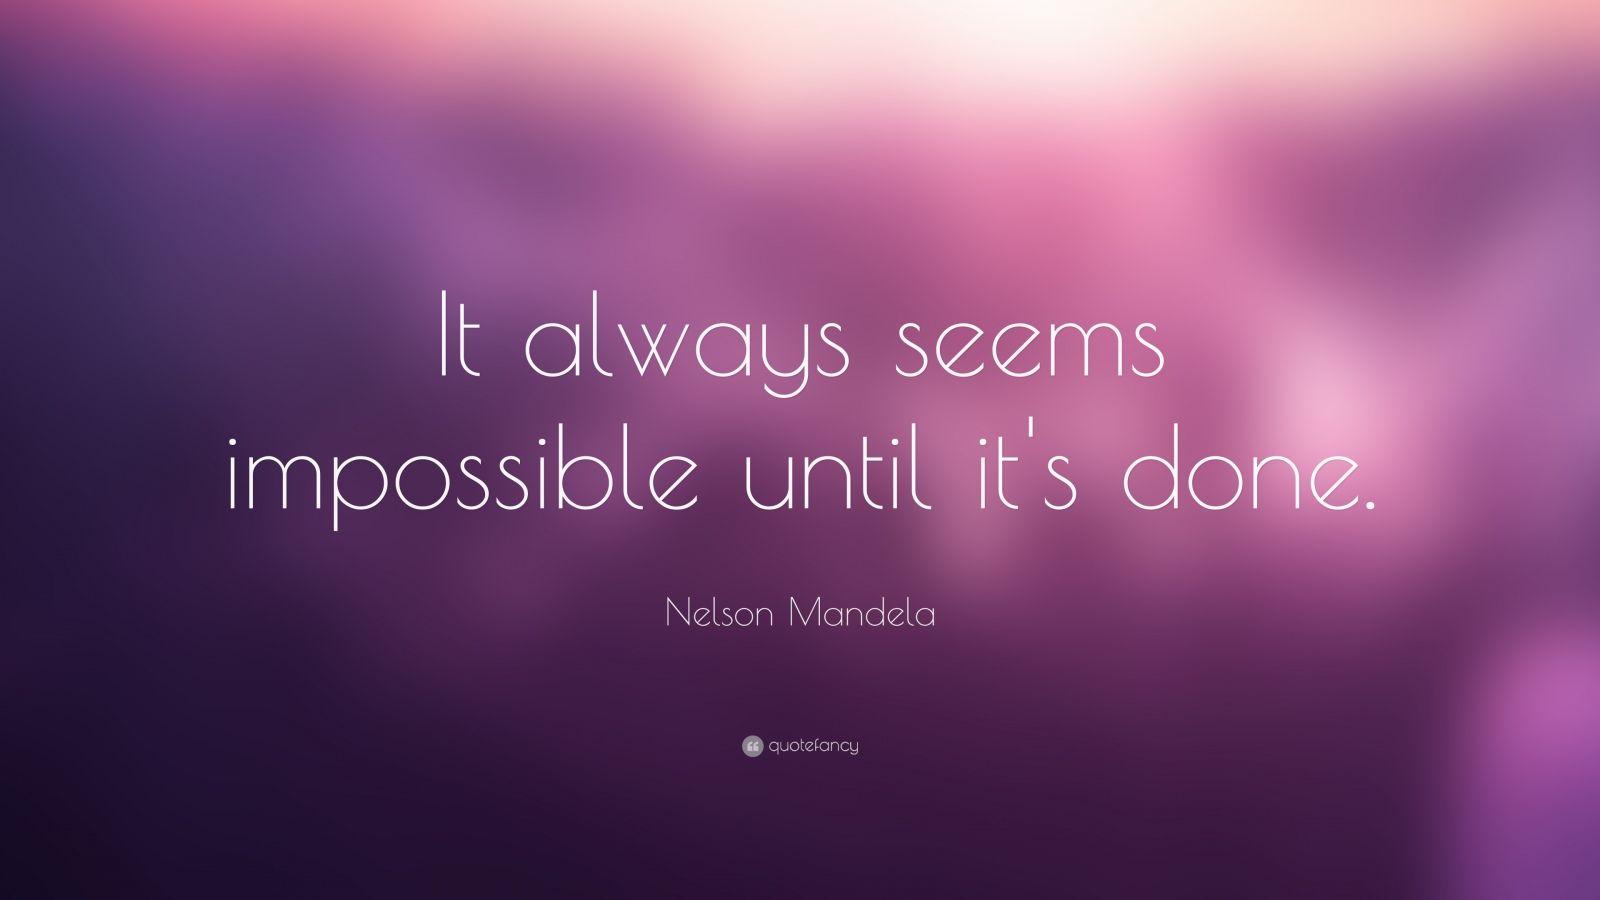 Perseverance Quotes: “It always seems impossible until it's done